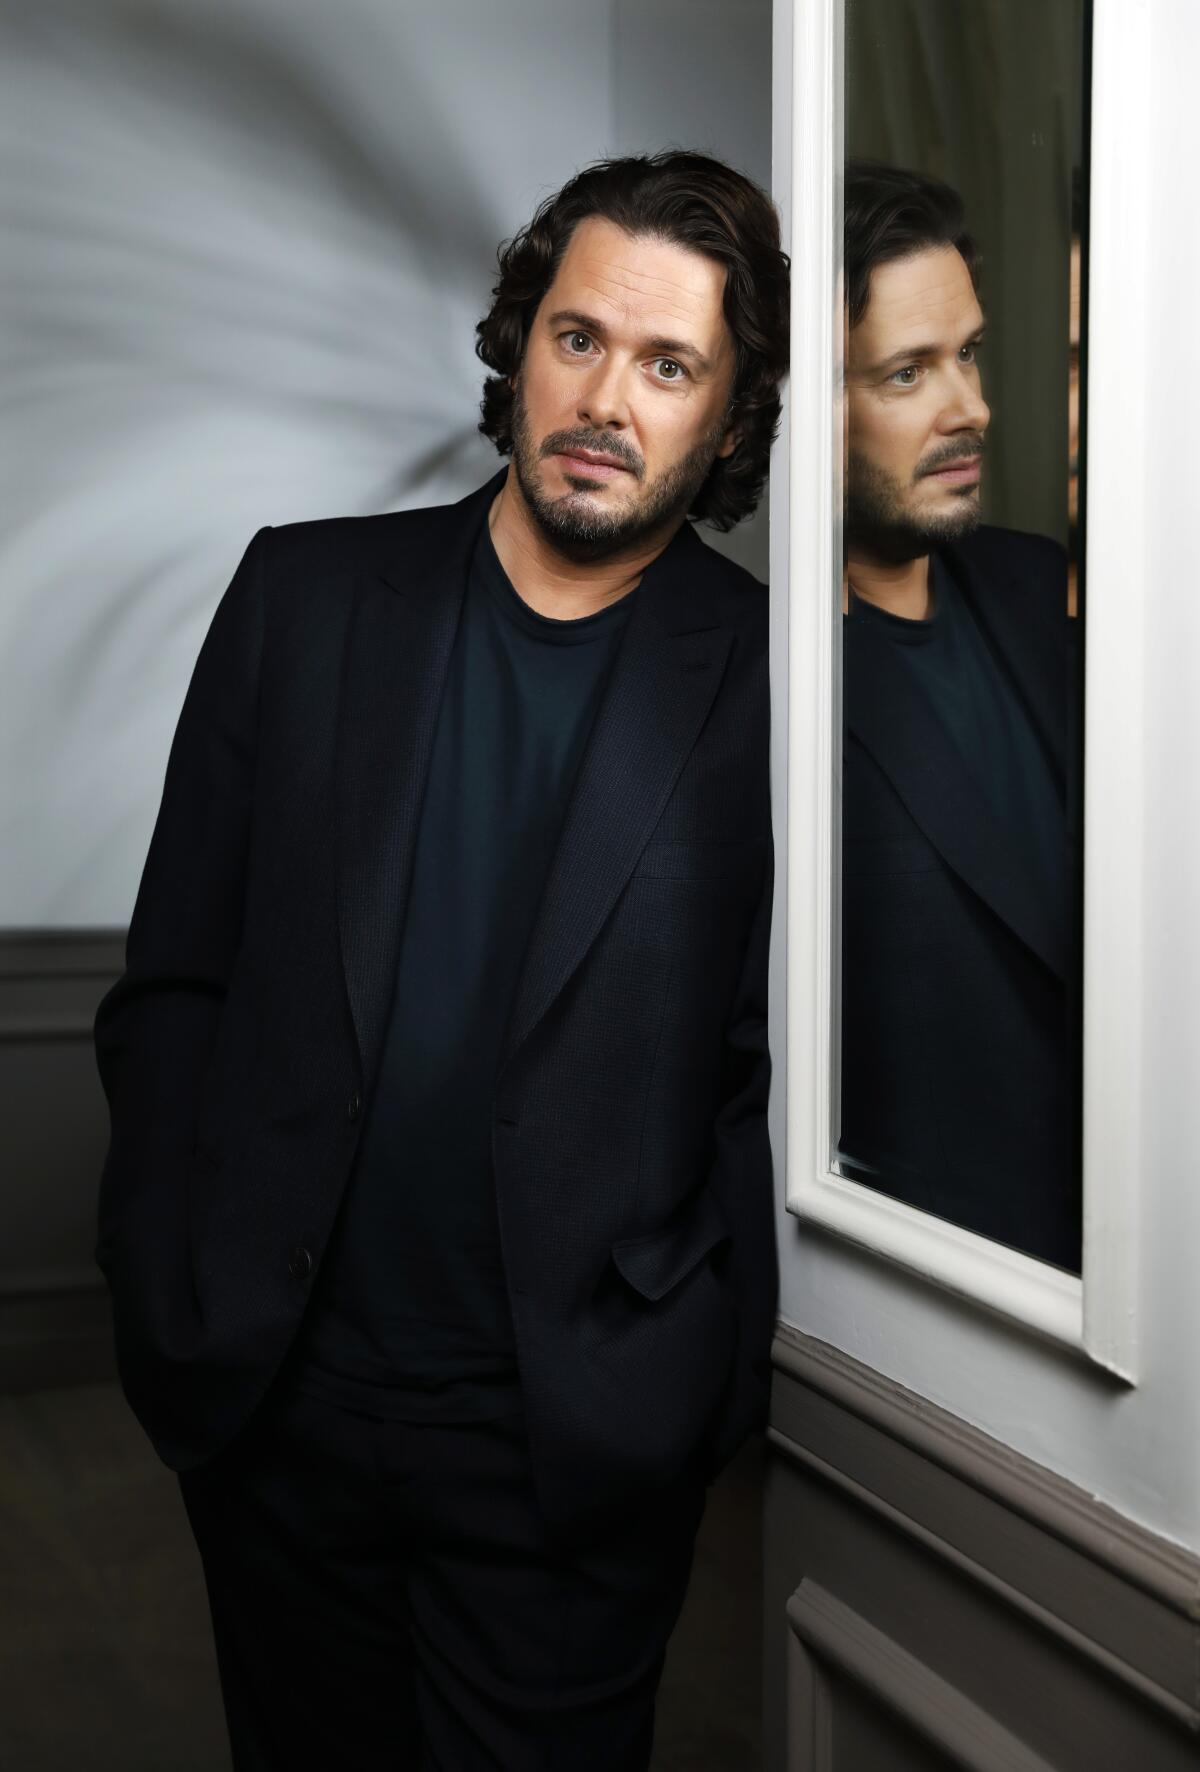 Writer-director Edgar Wright leans against a mirror, reflecting a second image of his face. 